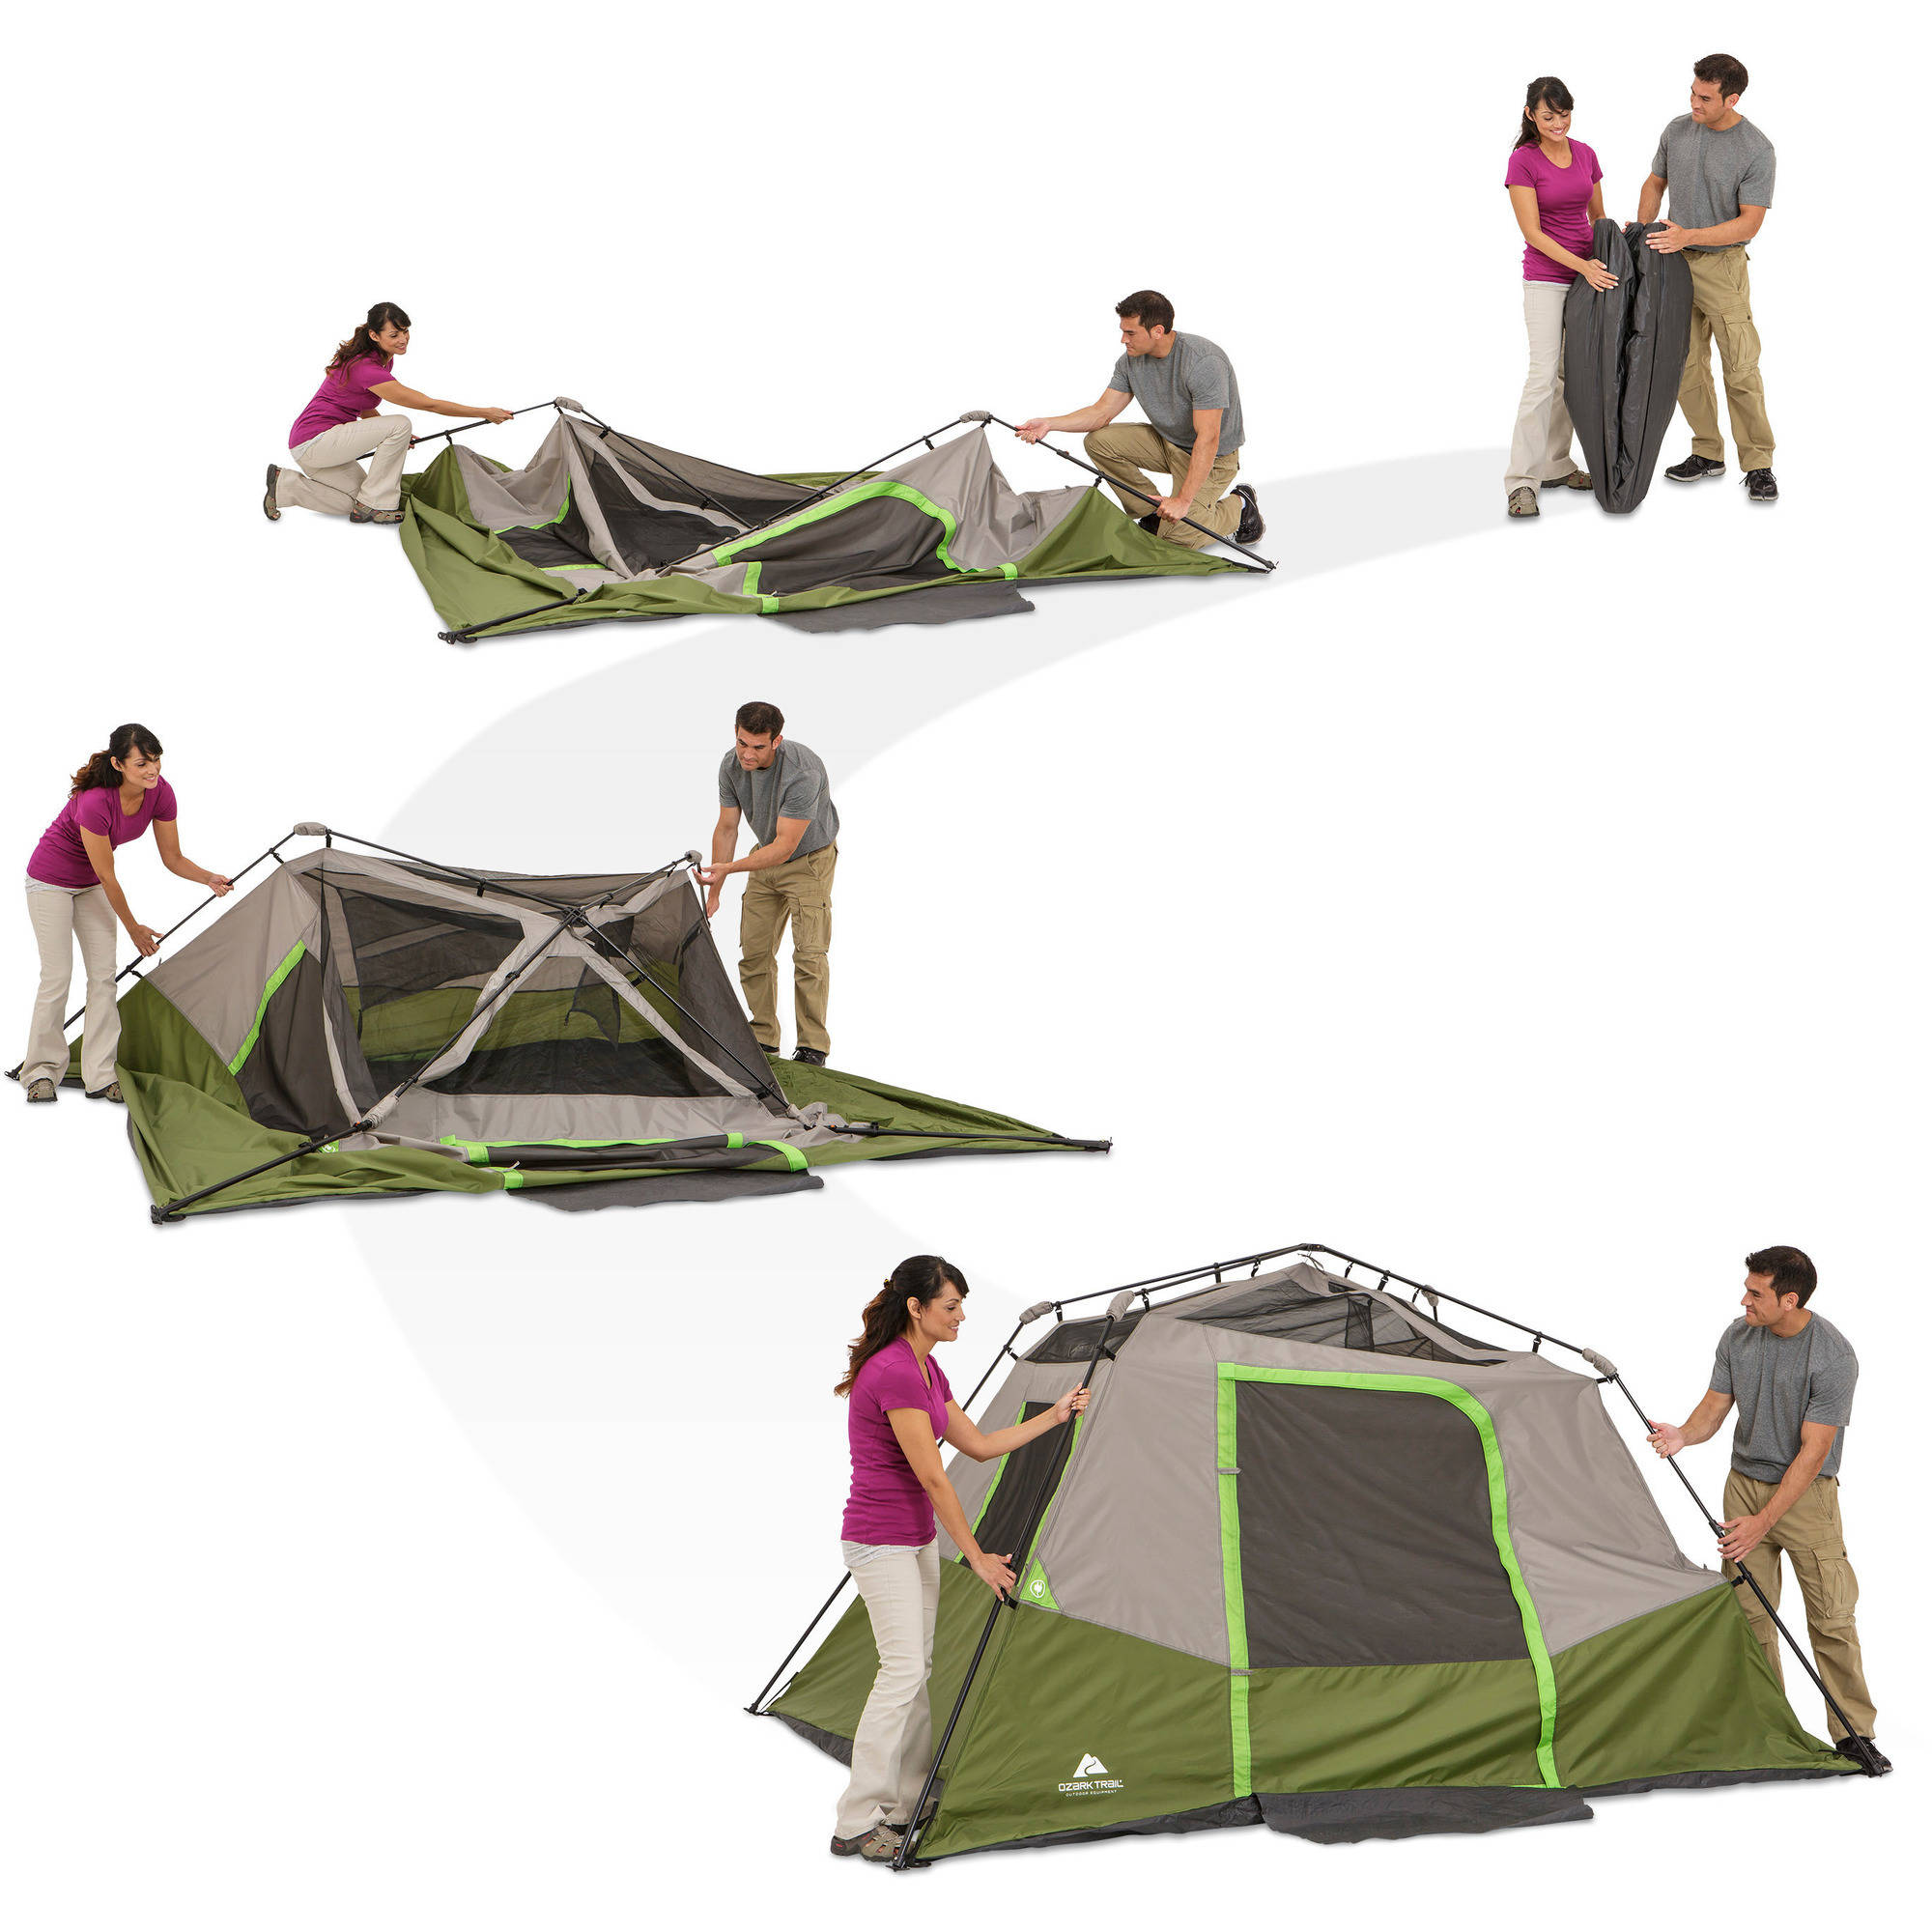 Ozark Trail 6 Person Instant Cabin Tent - image 3 of 8